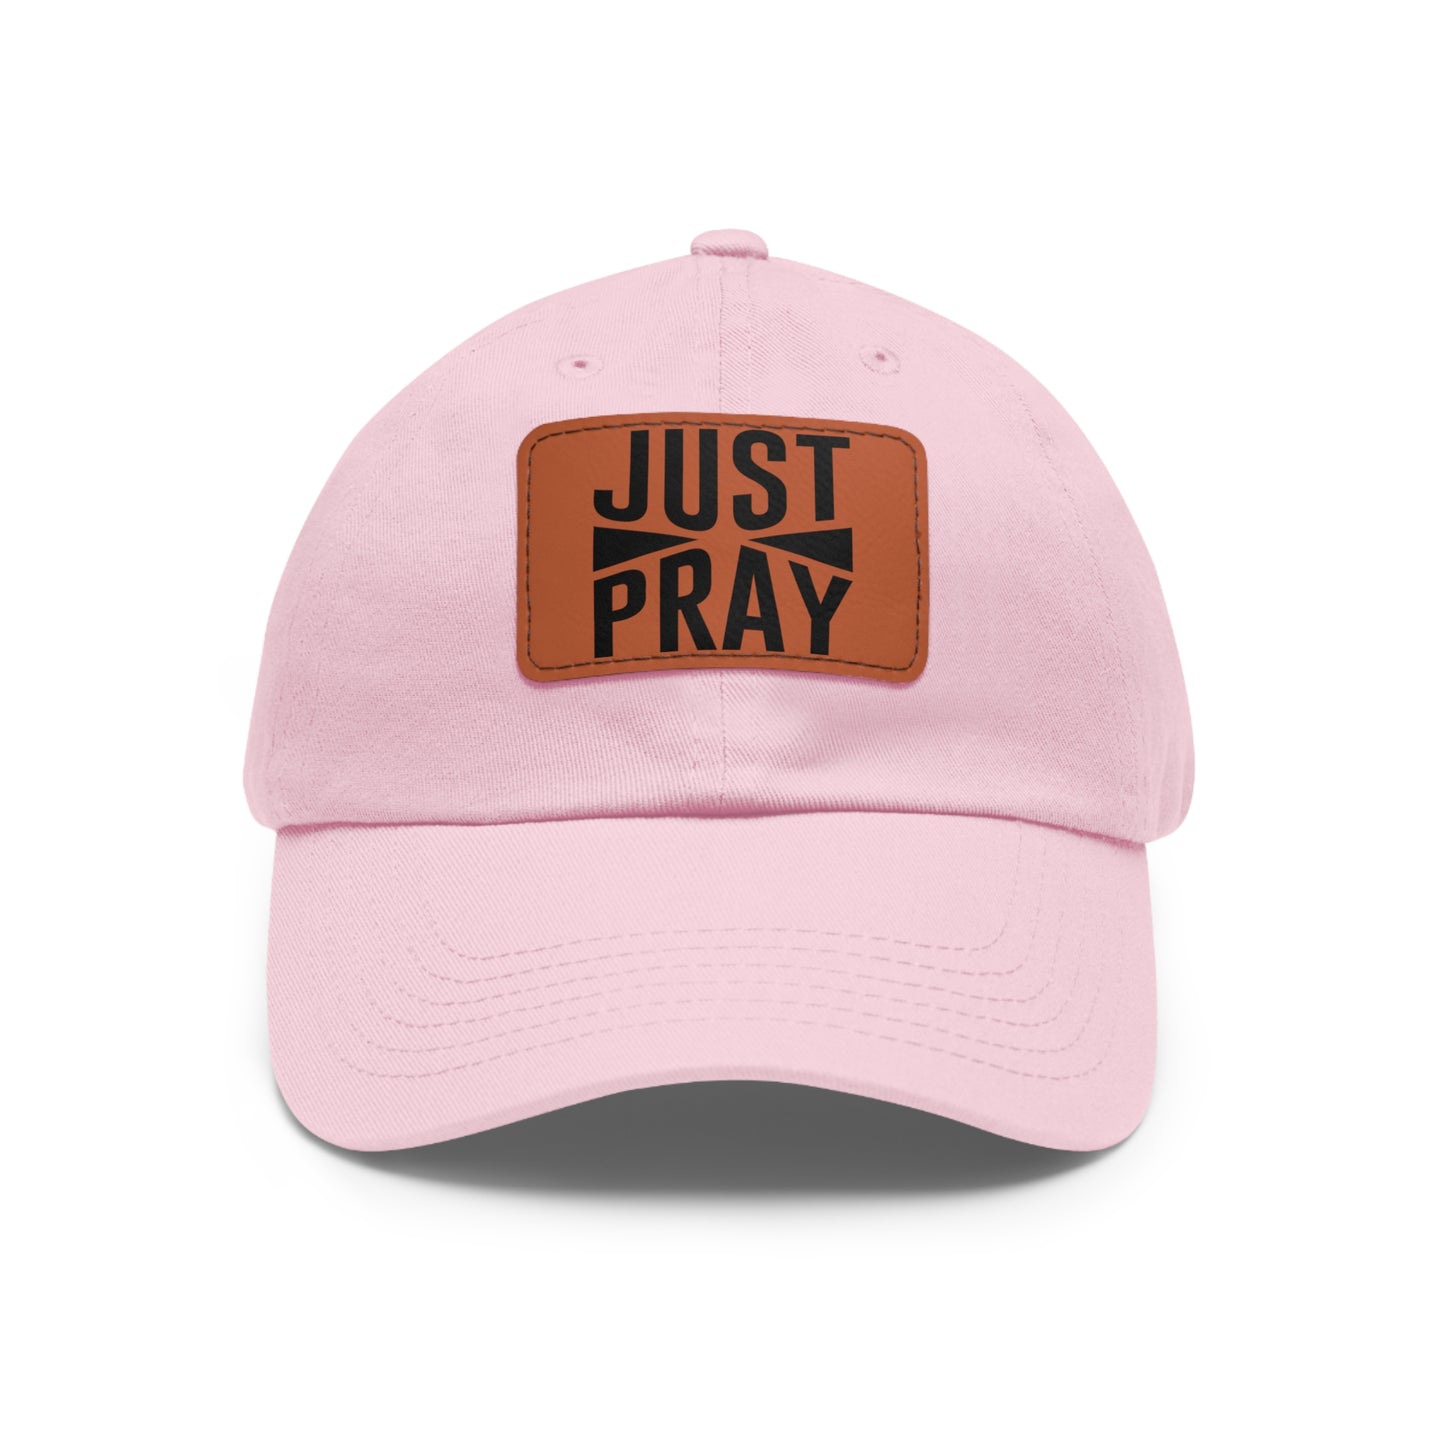 JUST PRAY - LEATHER PATCH CAP